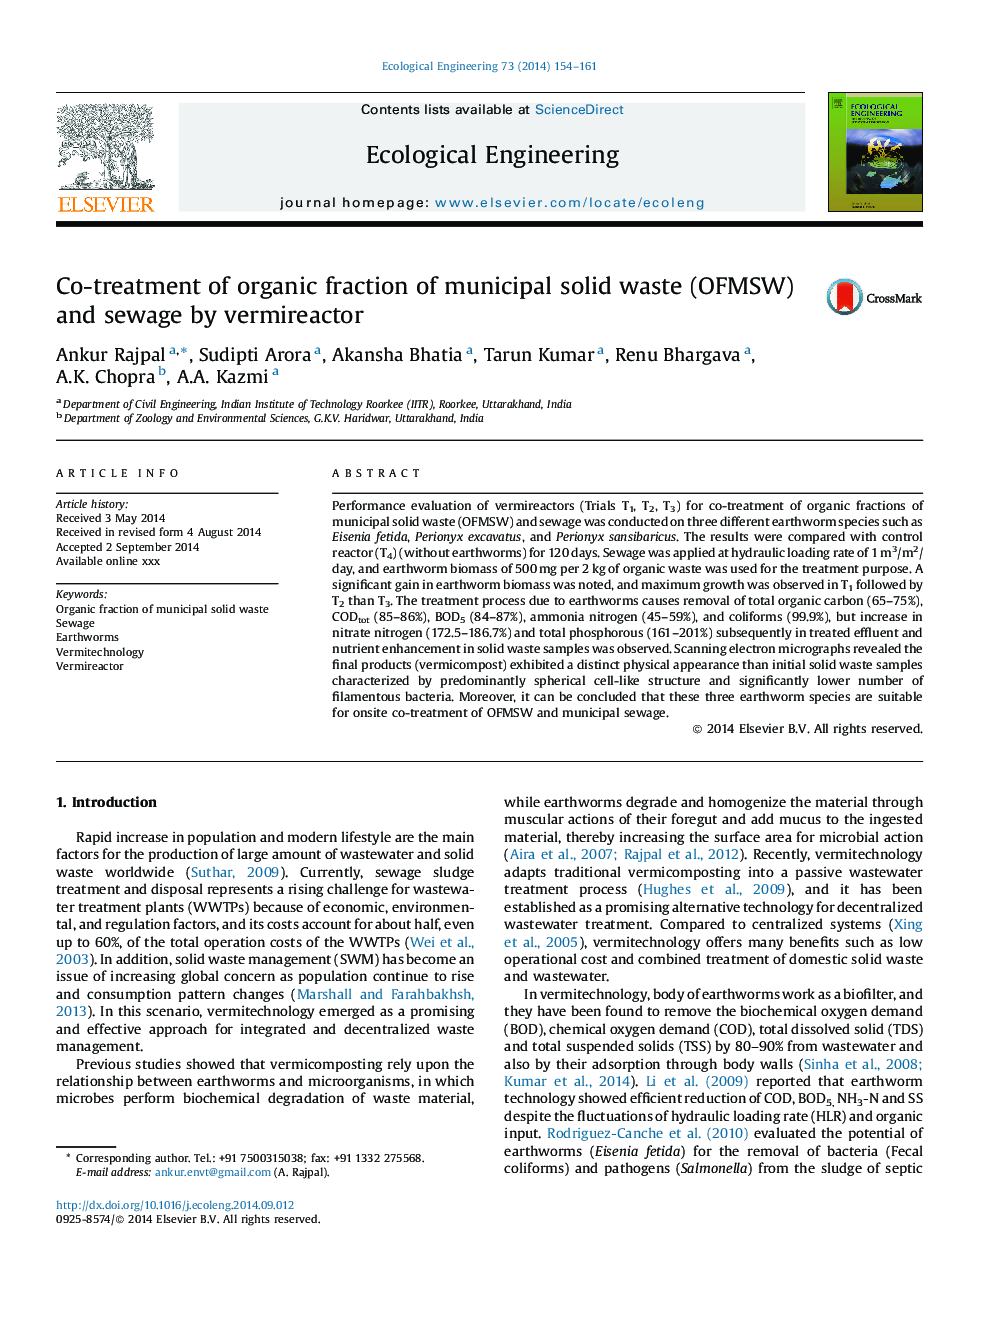 Co-treatment of organic fraction of municipal solid waste (OFMSW) and sewage by vermireactor